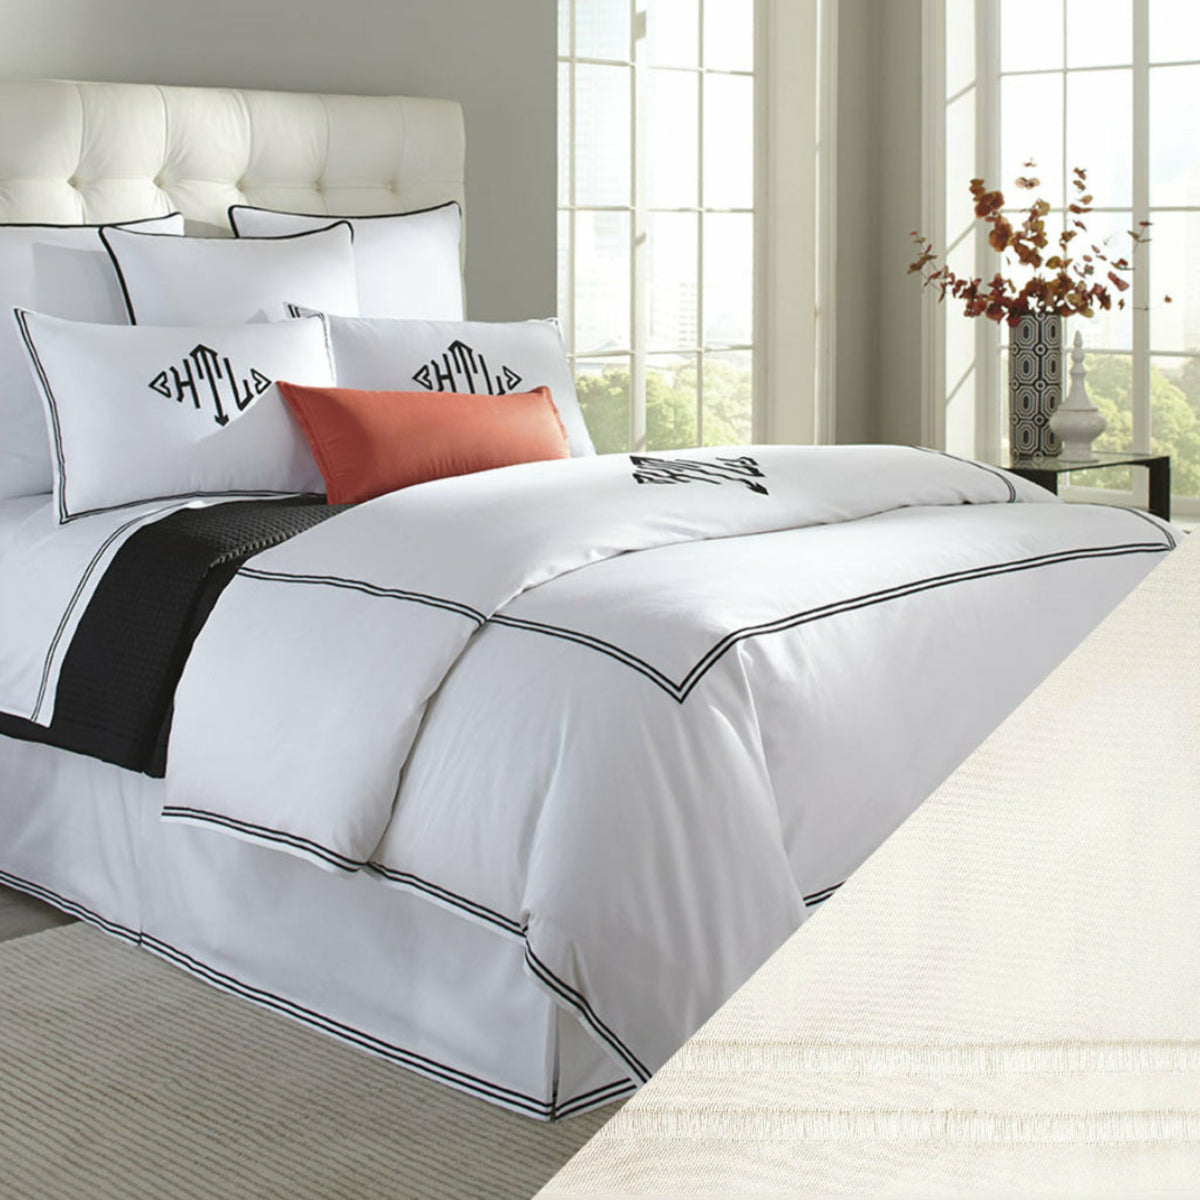 Home Treasures Madison Royal Sateen Hotel Bedding Ivory/Ivory Fine Linens